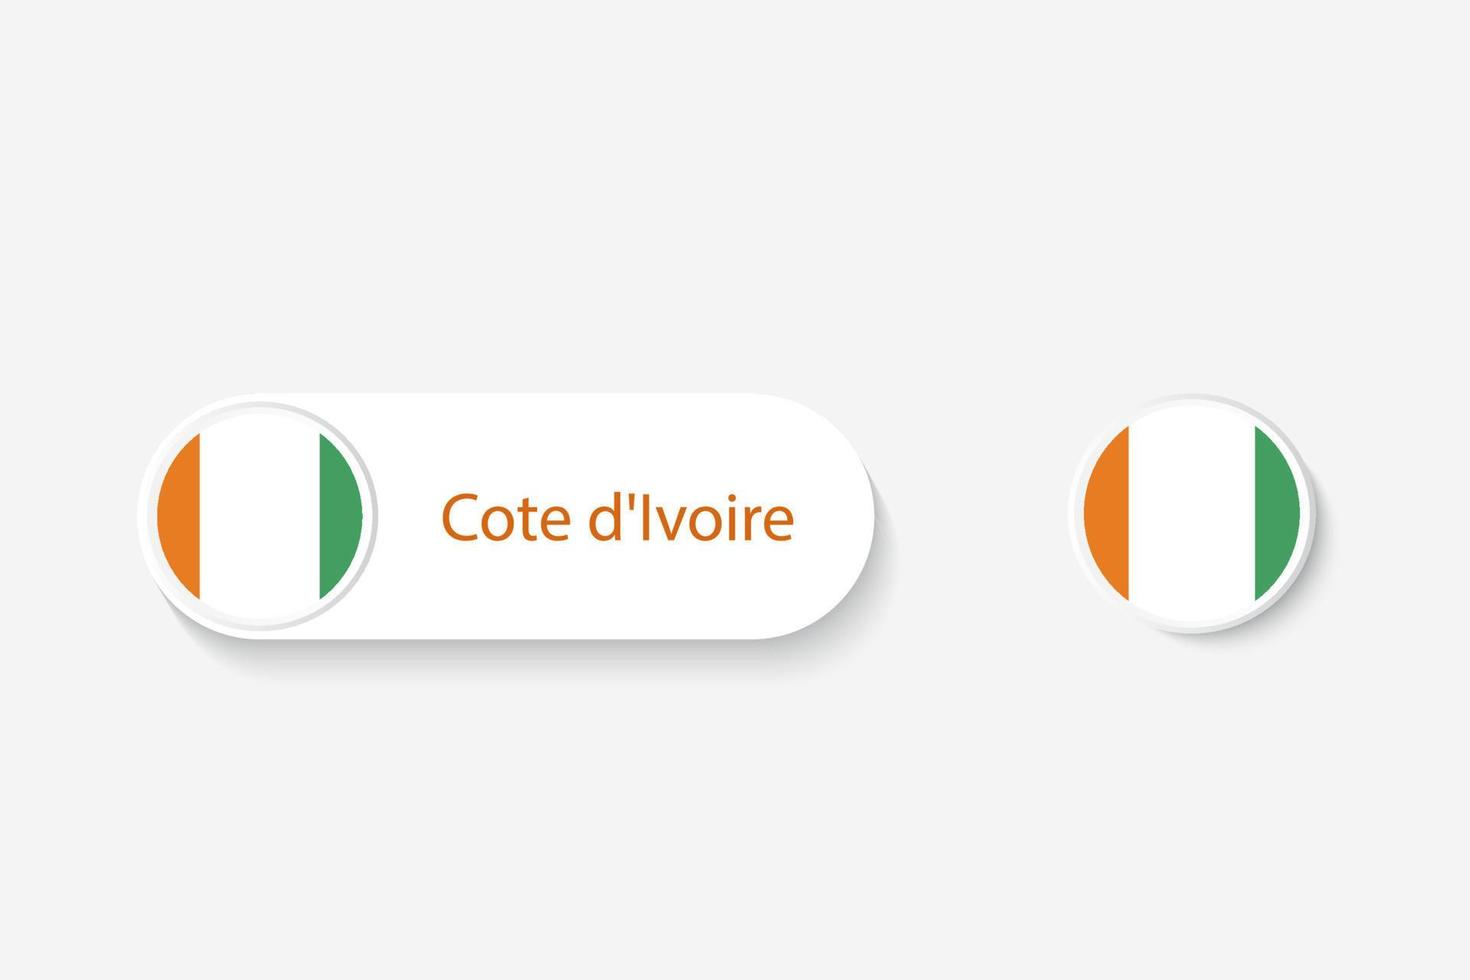 Cote d'Ivoire button flag in illustration of oval shaped with word of Cote d'Ivoire. And button flag Cote d'Ivoire. vector